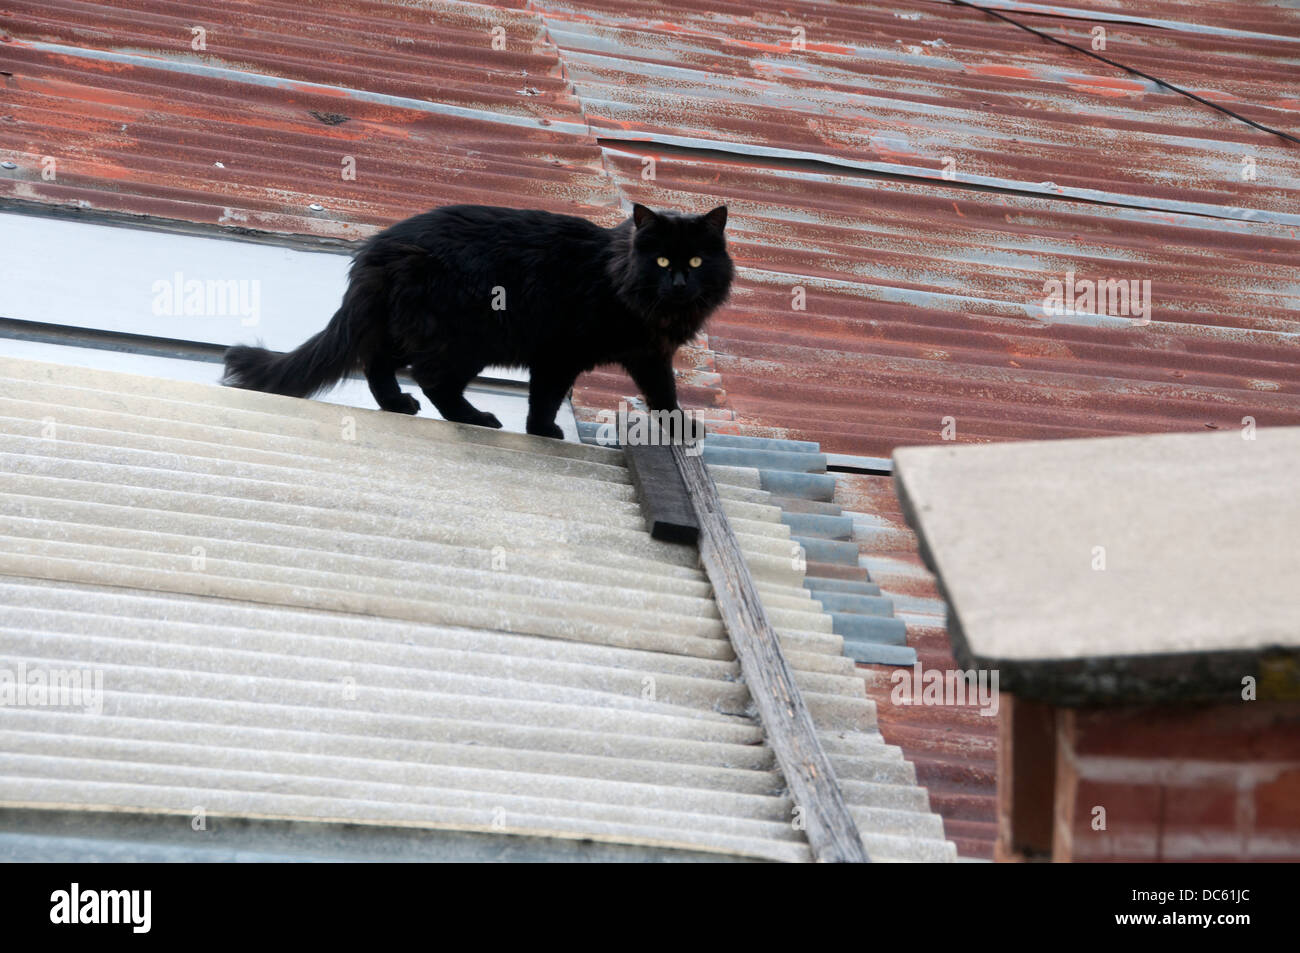 Bolivia June 2013. Black cat on a corrugated iron roof Stock Photo